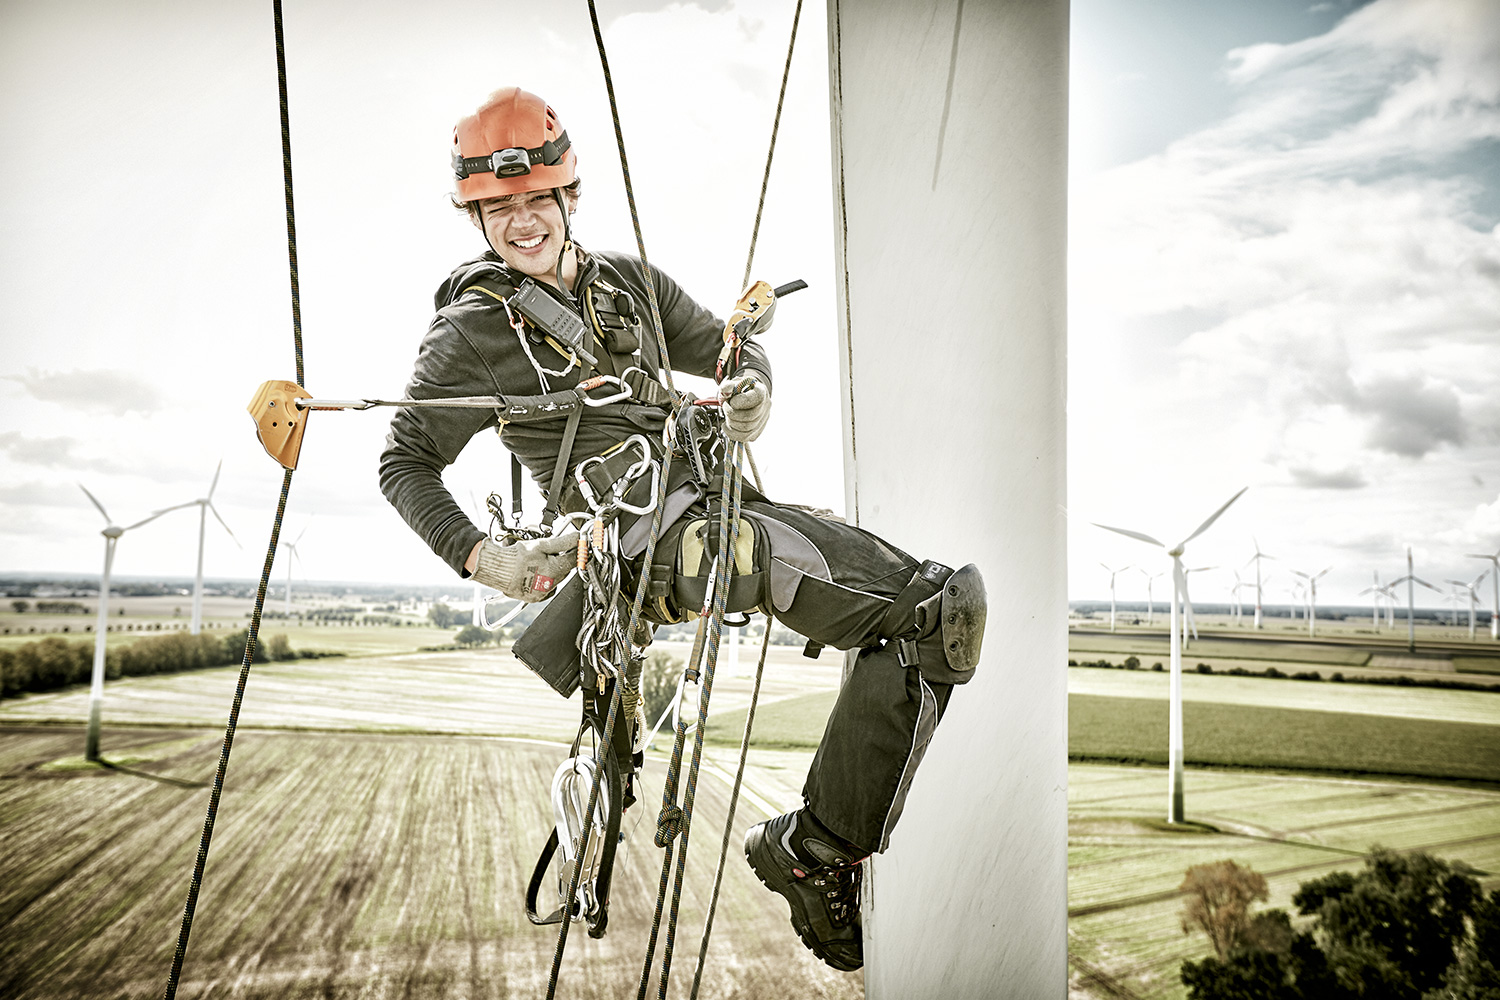 Wind Turbine Engineer grins into the camera while abseiling down a rotor blade